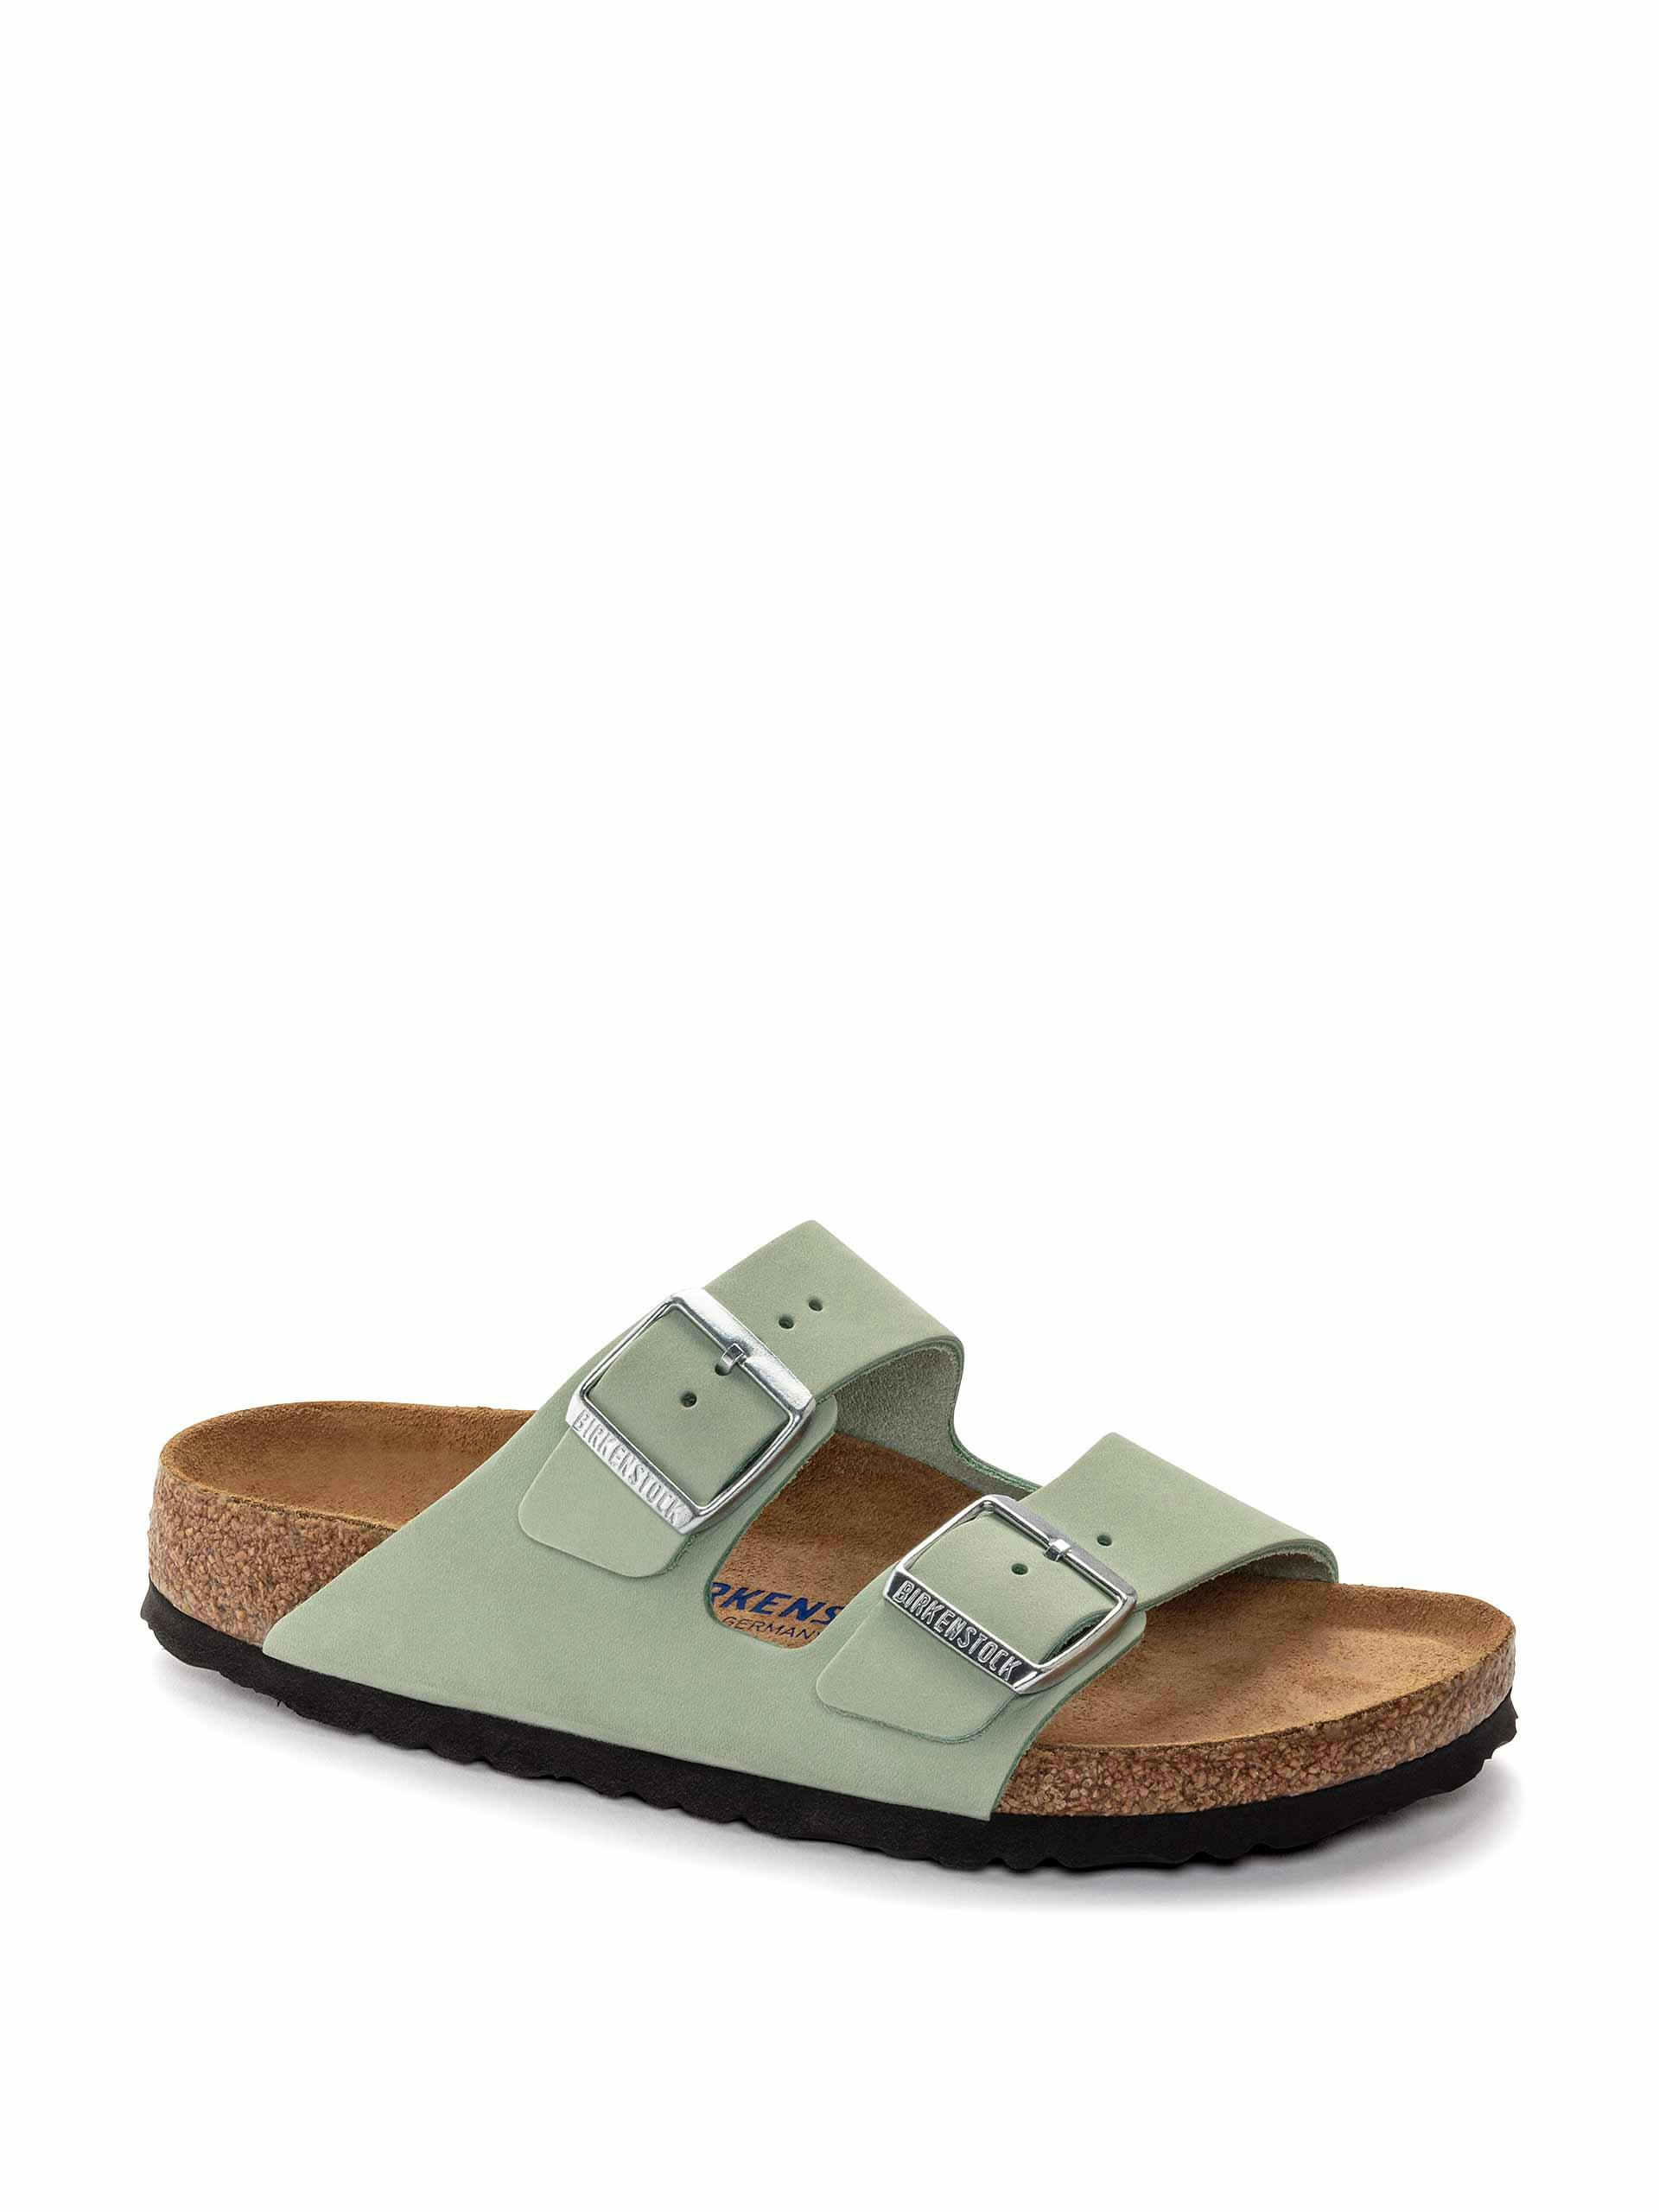 Two strap Arizona leather sandals in Matcha